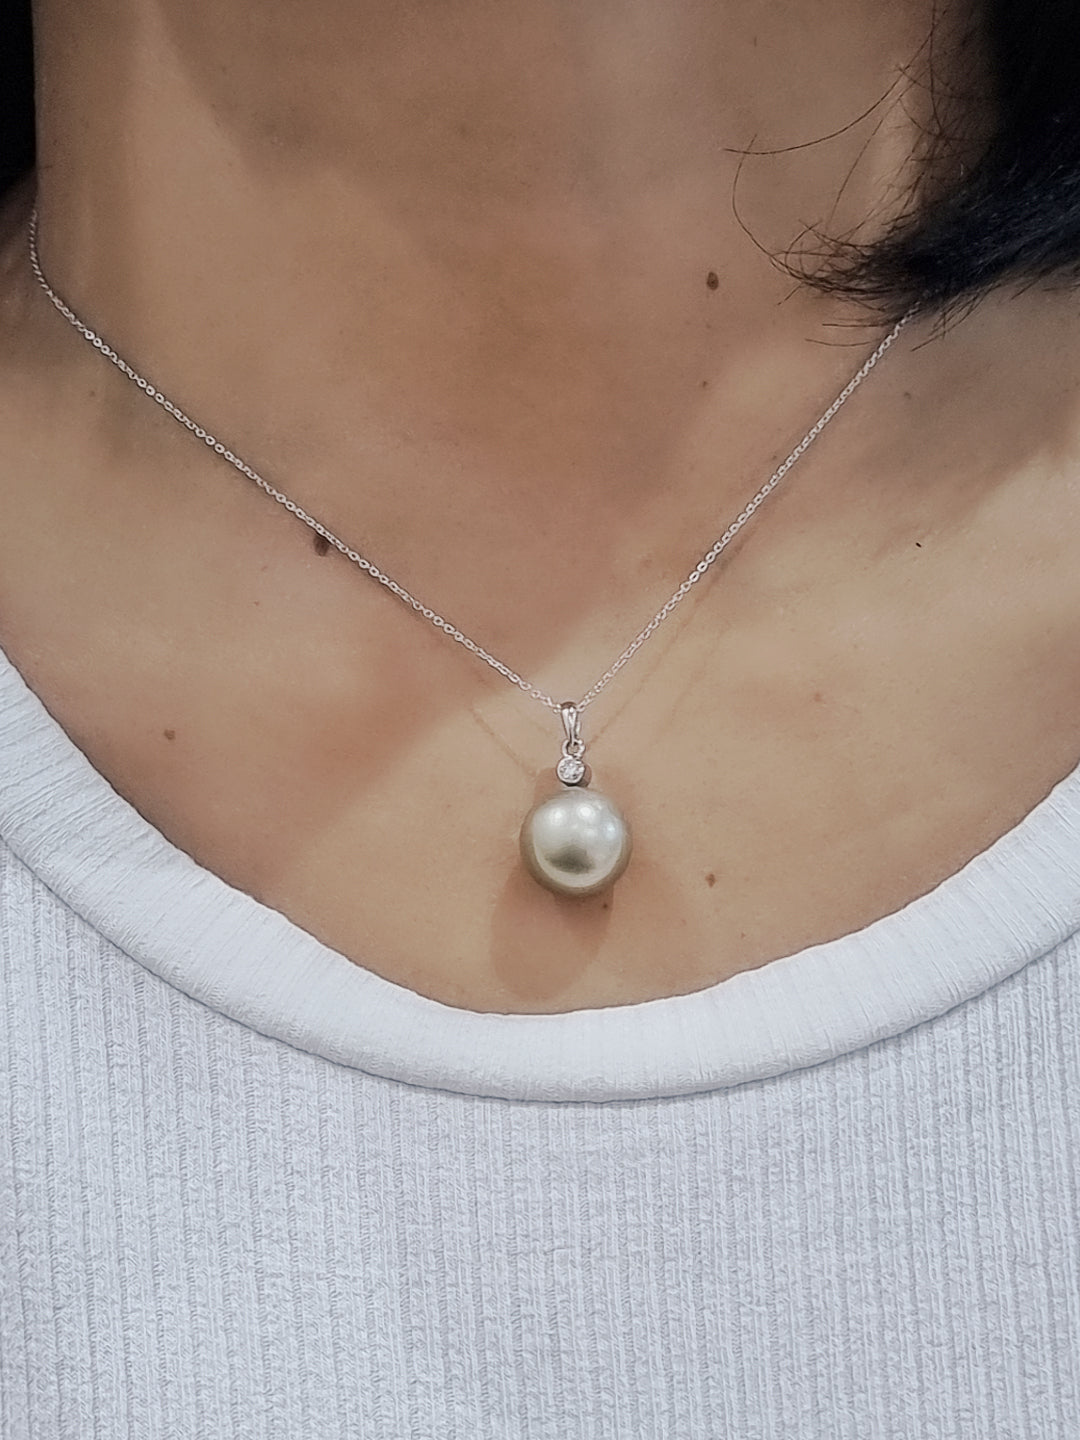 Pearl And Diamond Pendant In 18k White Gold.